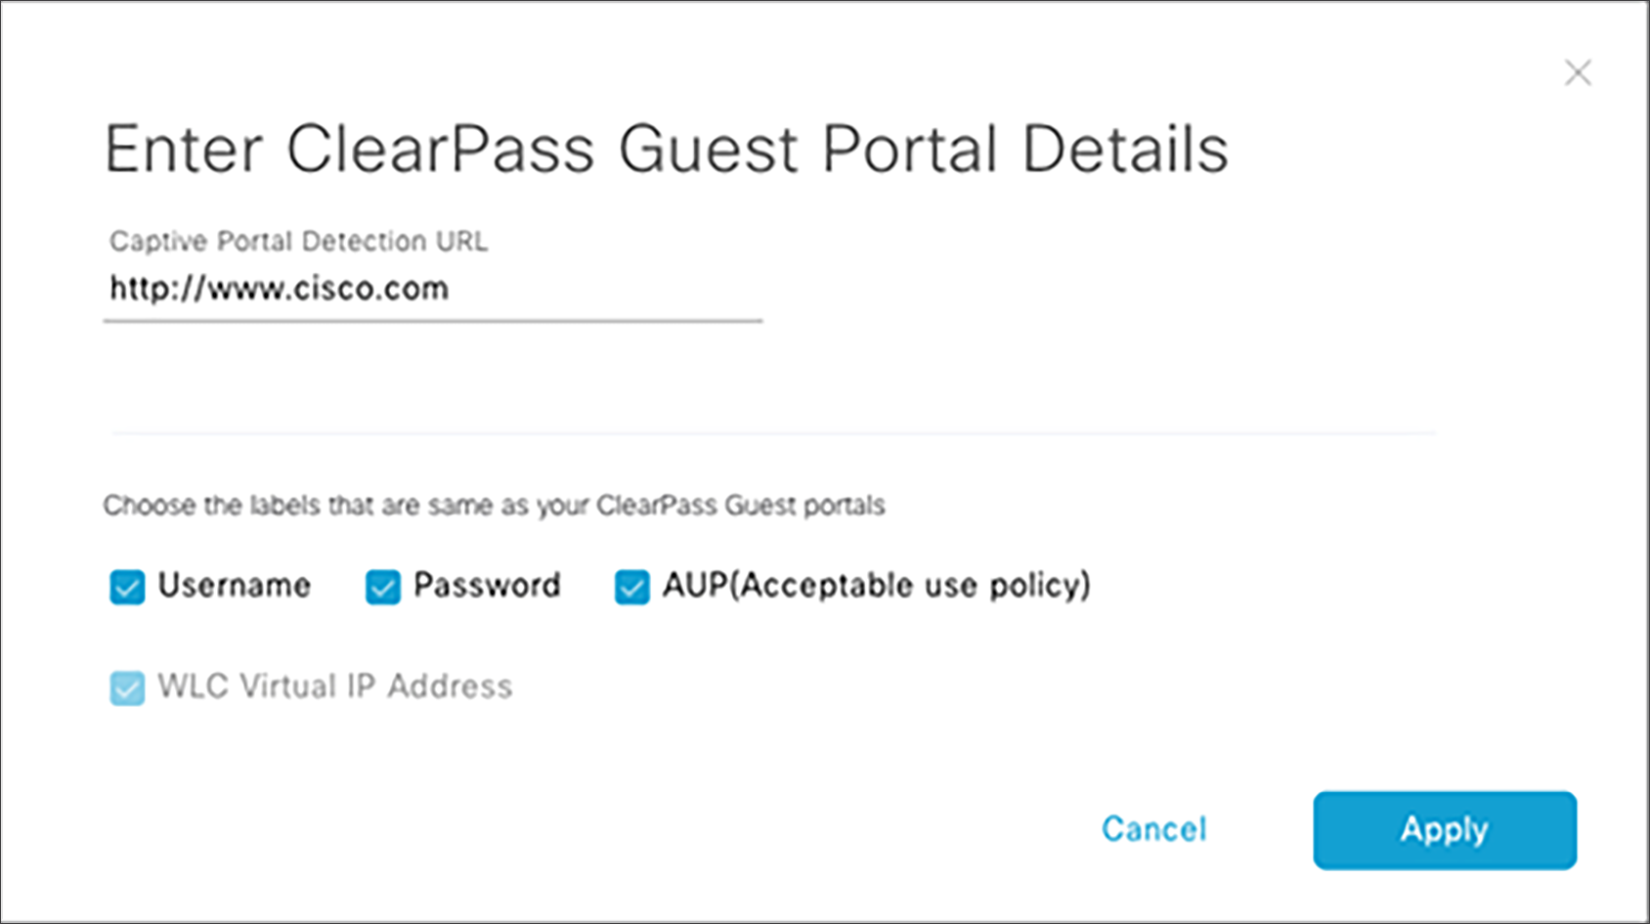 Configuring ClearPass guest portal details during test creation